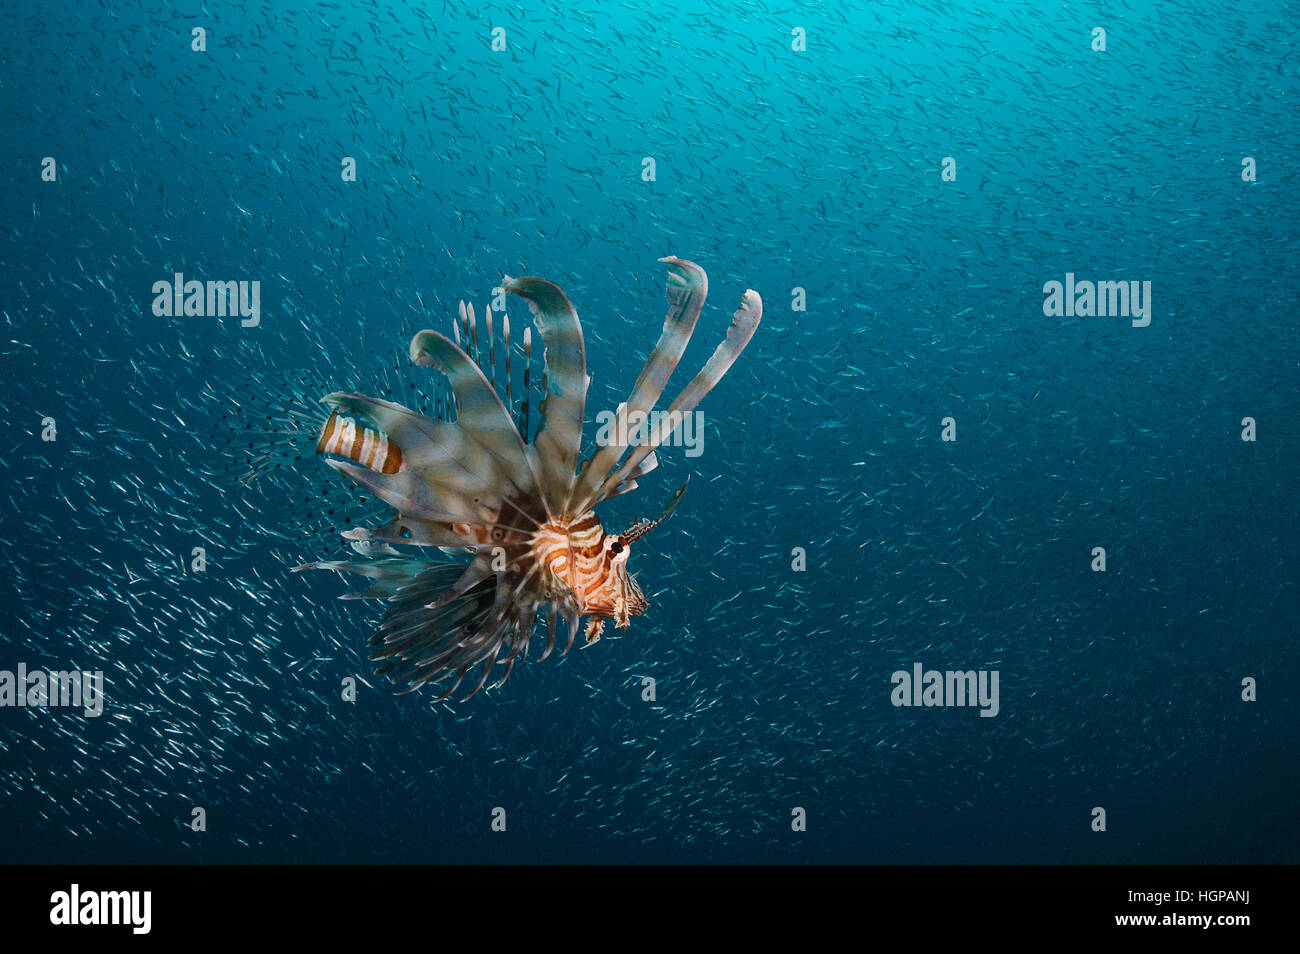 Underwater picture of the Common lionfish hunting in the school of glassfish in the clear blue waters of the Red Sea. Stock Photo